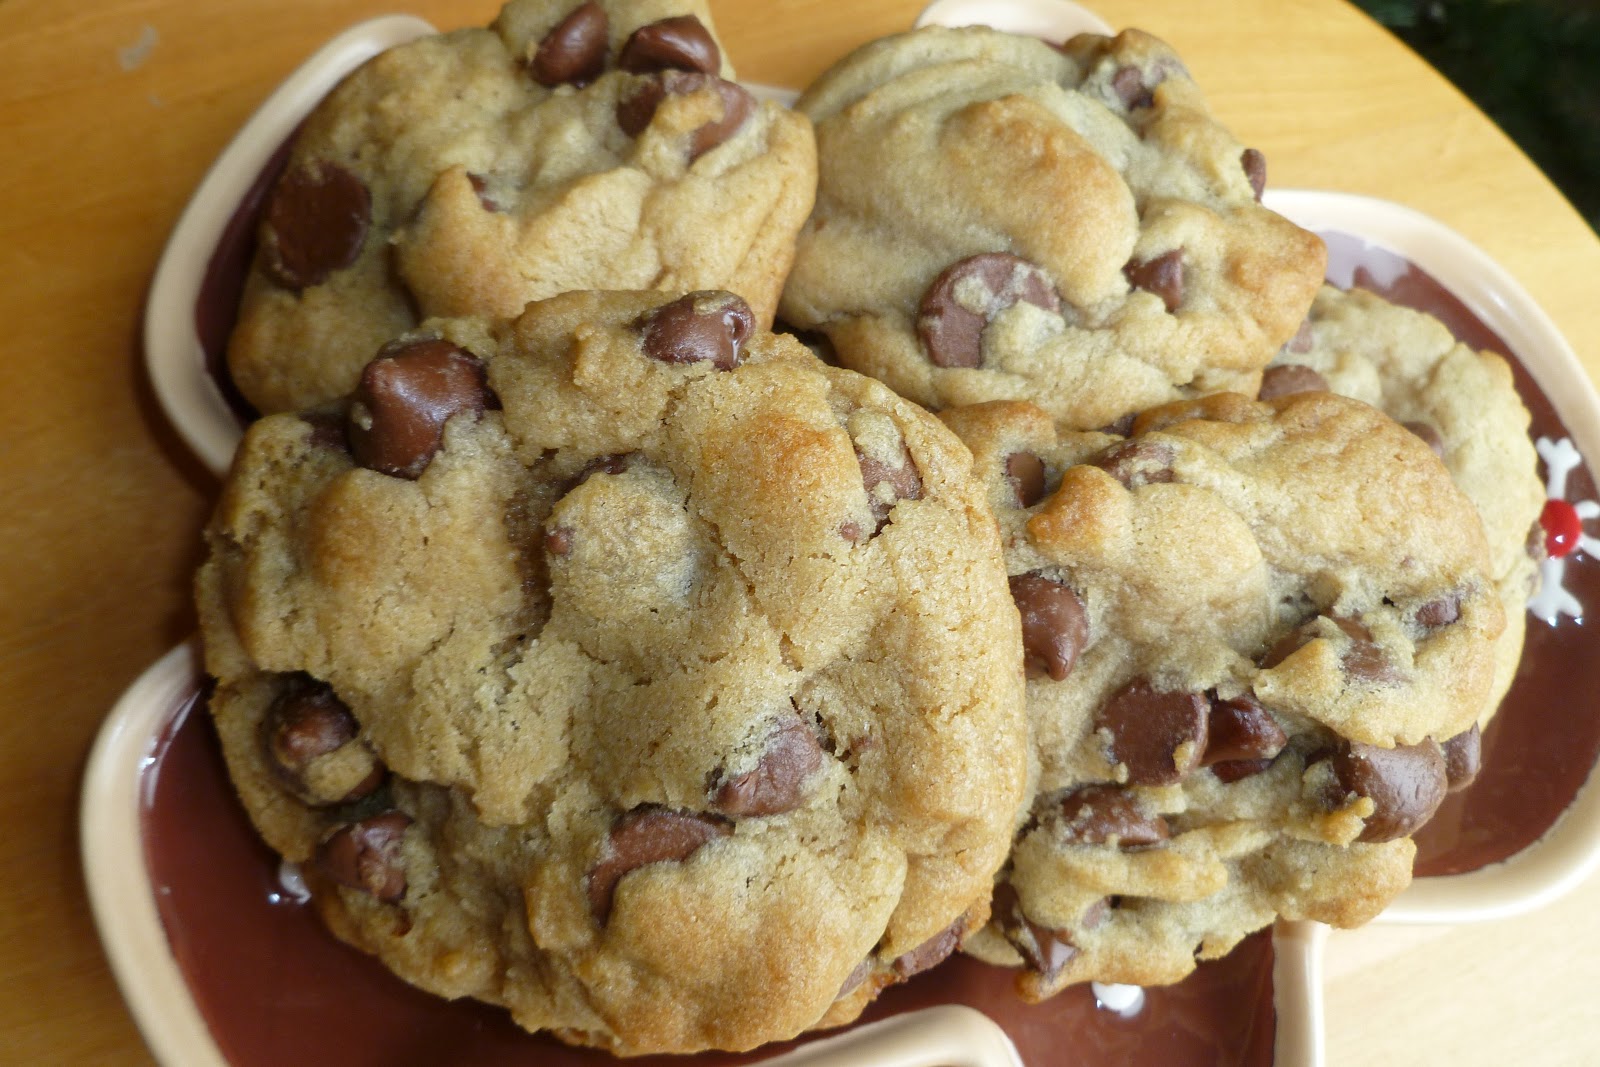 The Pastry Chef's Baking: Chocolate Chips and Chunks Cookies